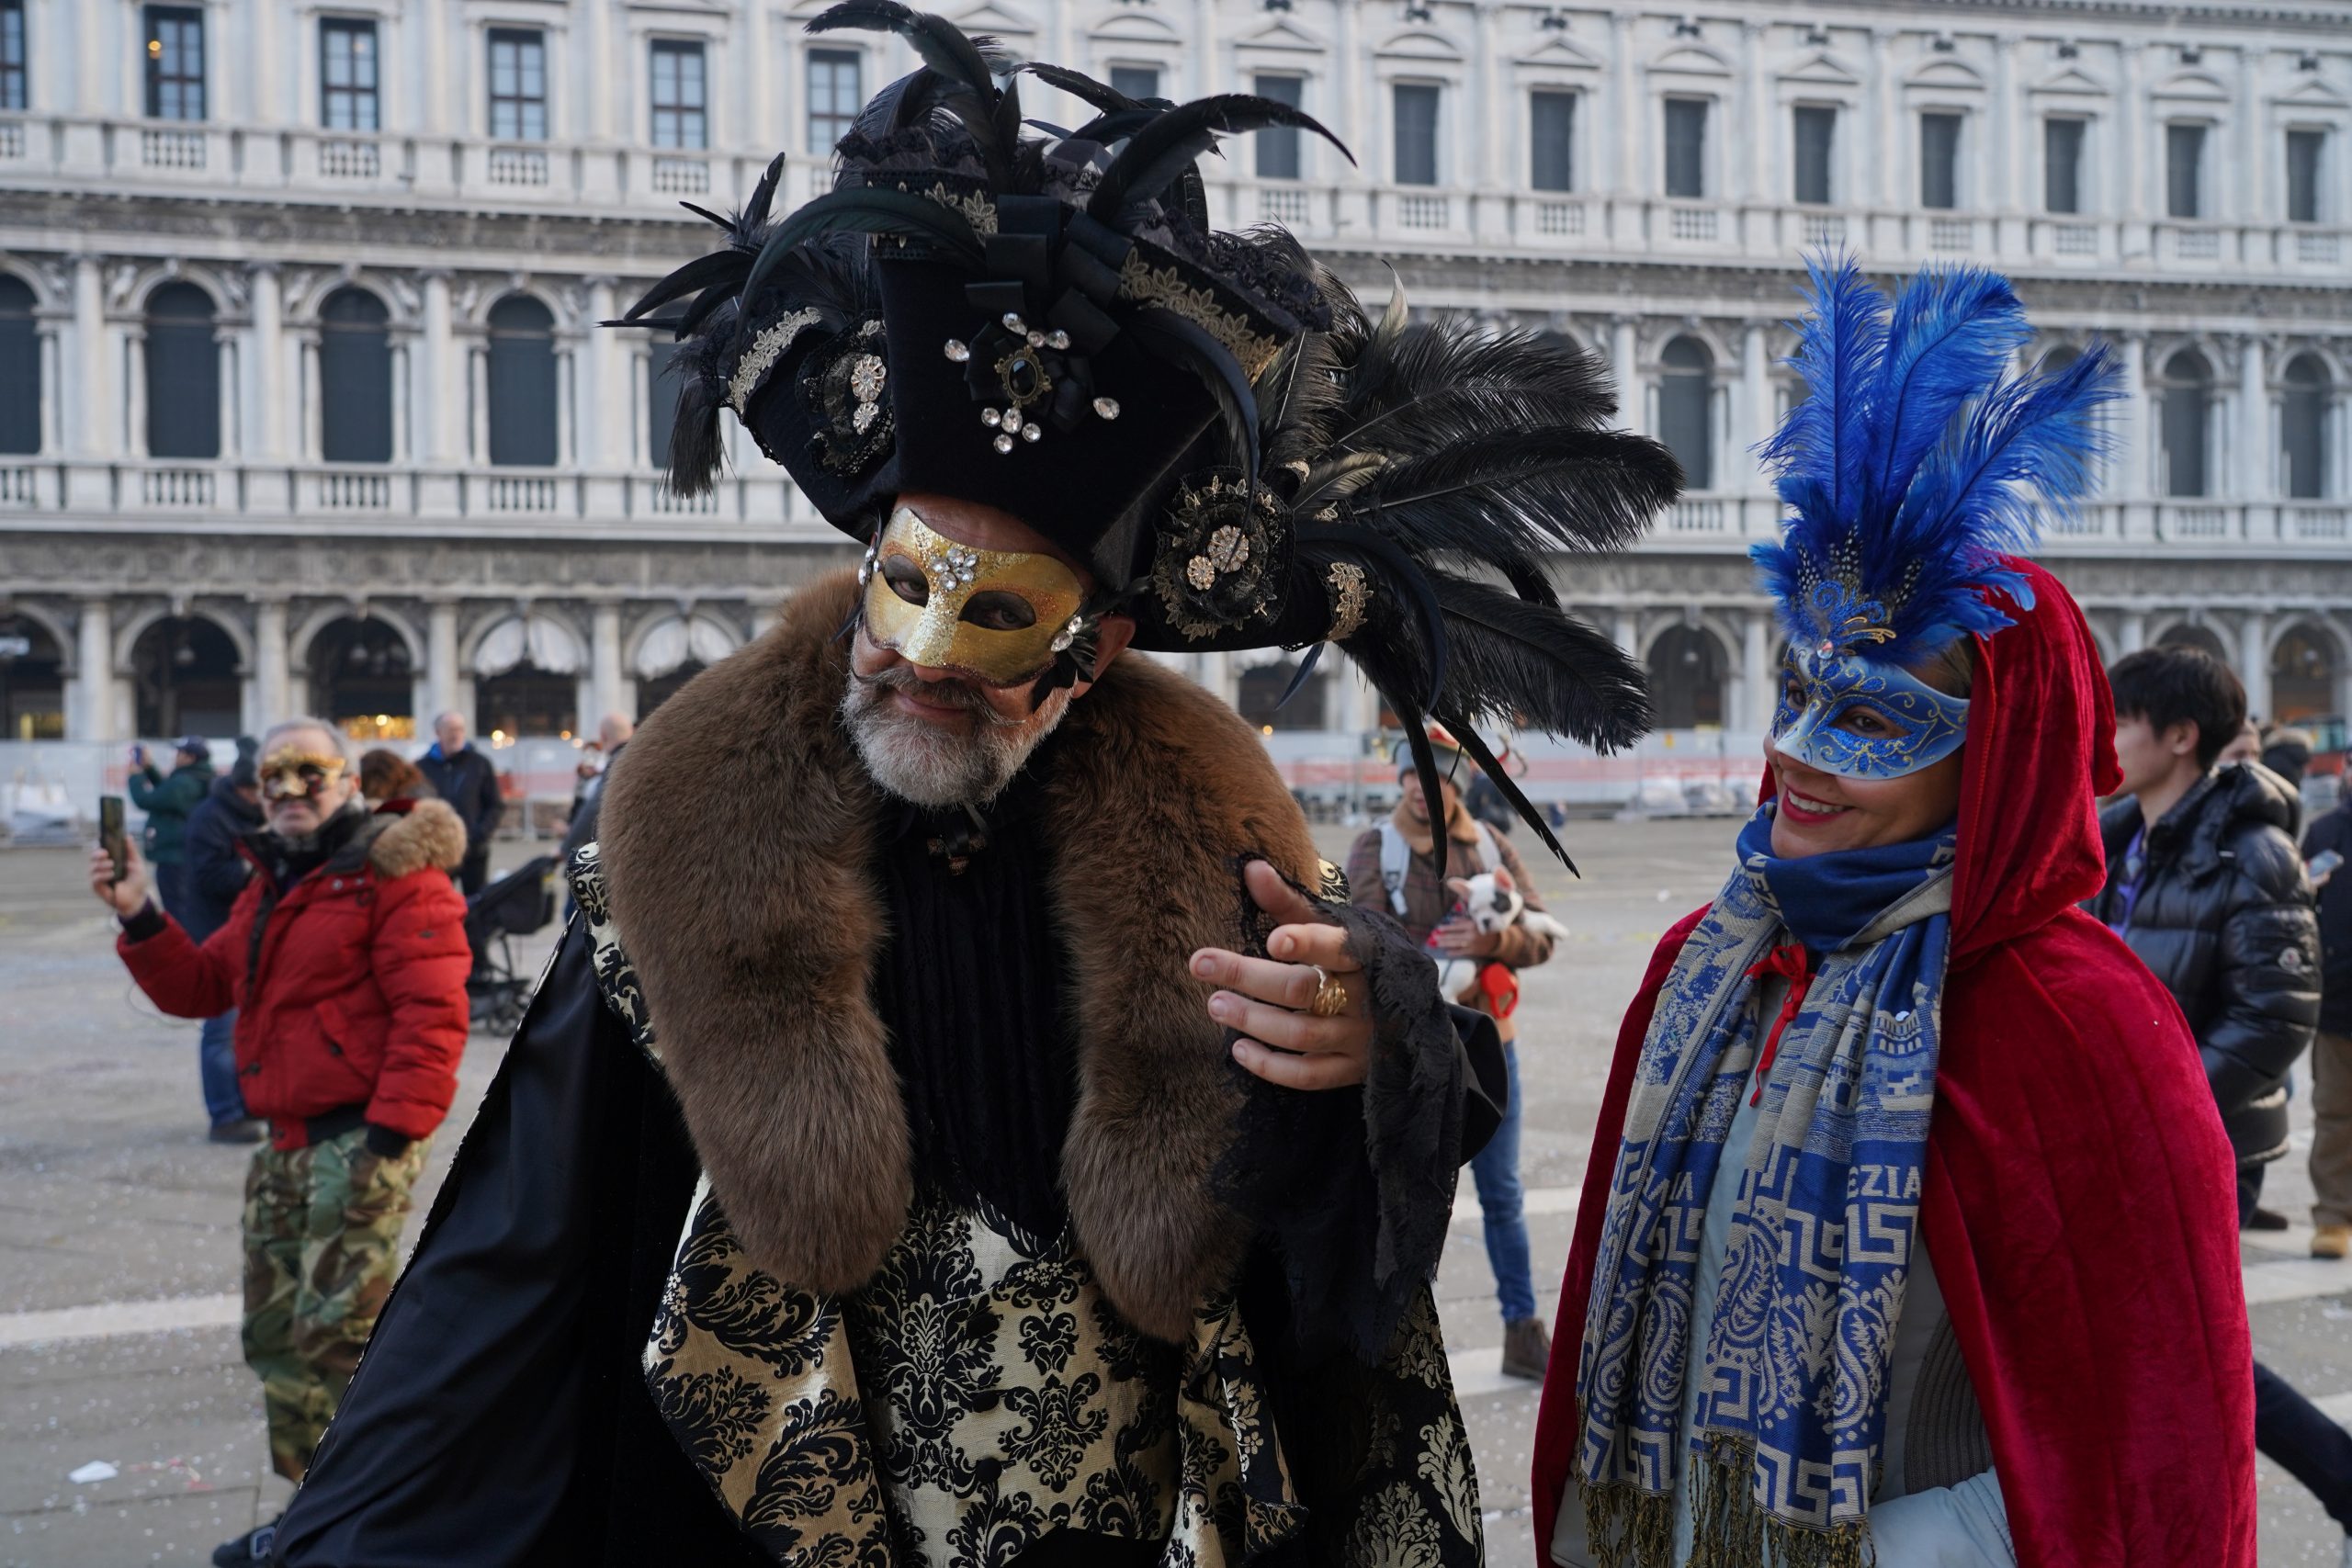 The Carnival of Venice is for both males and females to dress in costume.